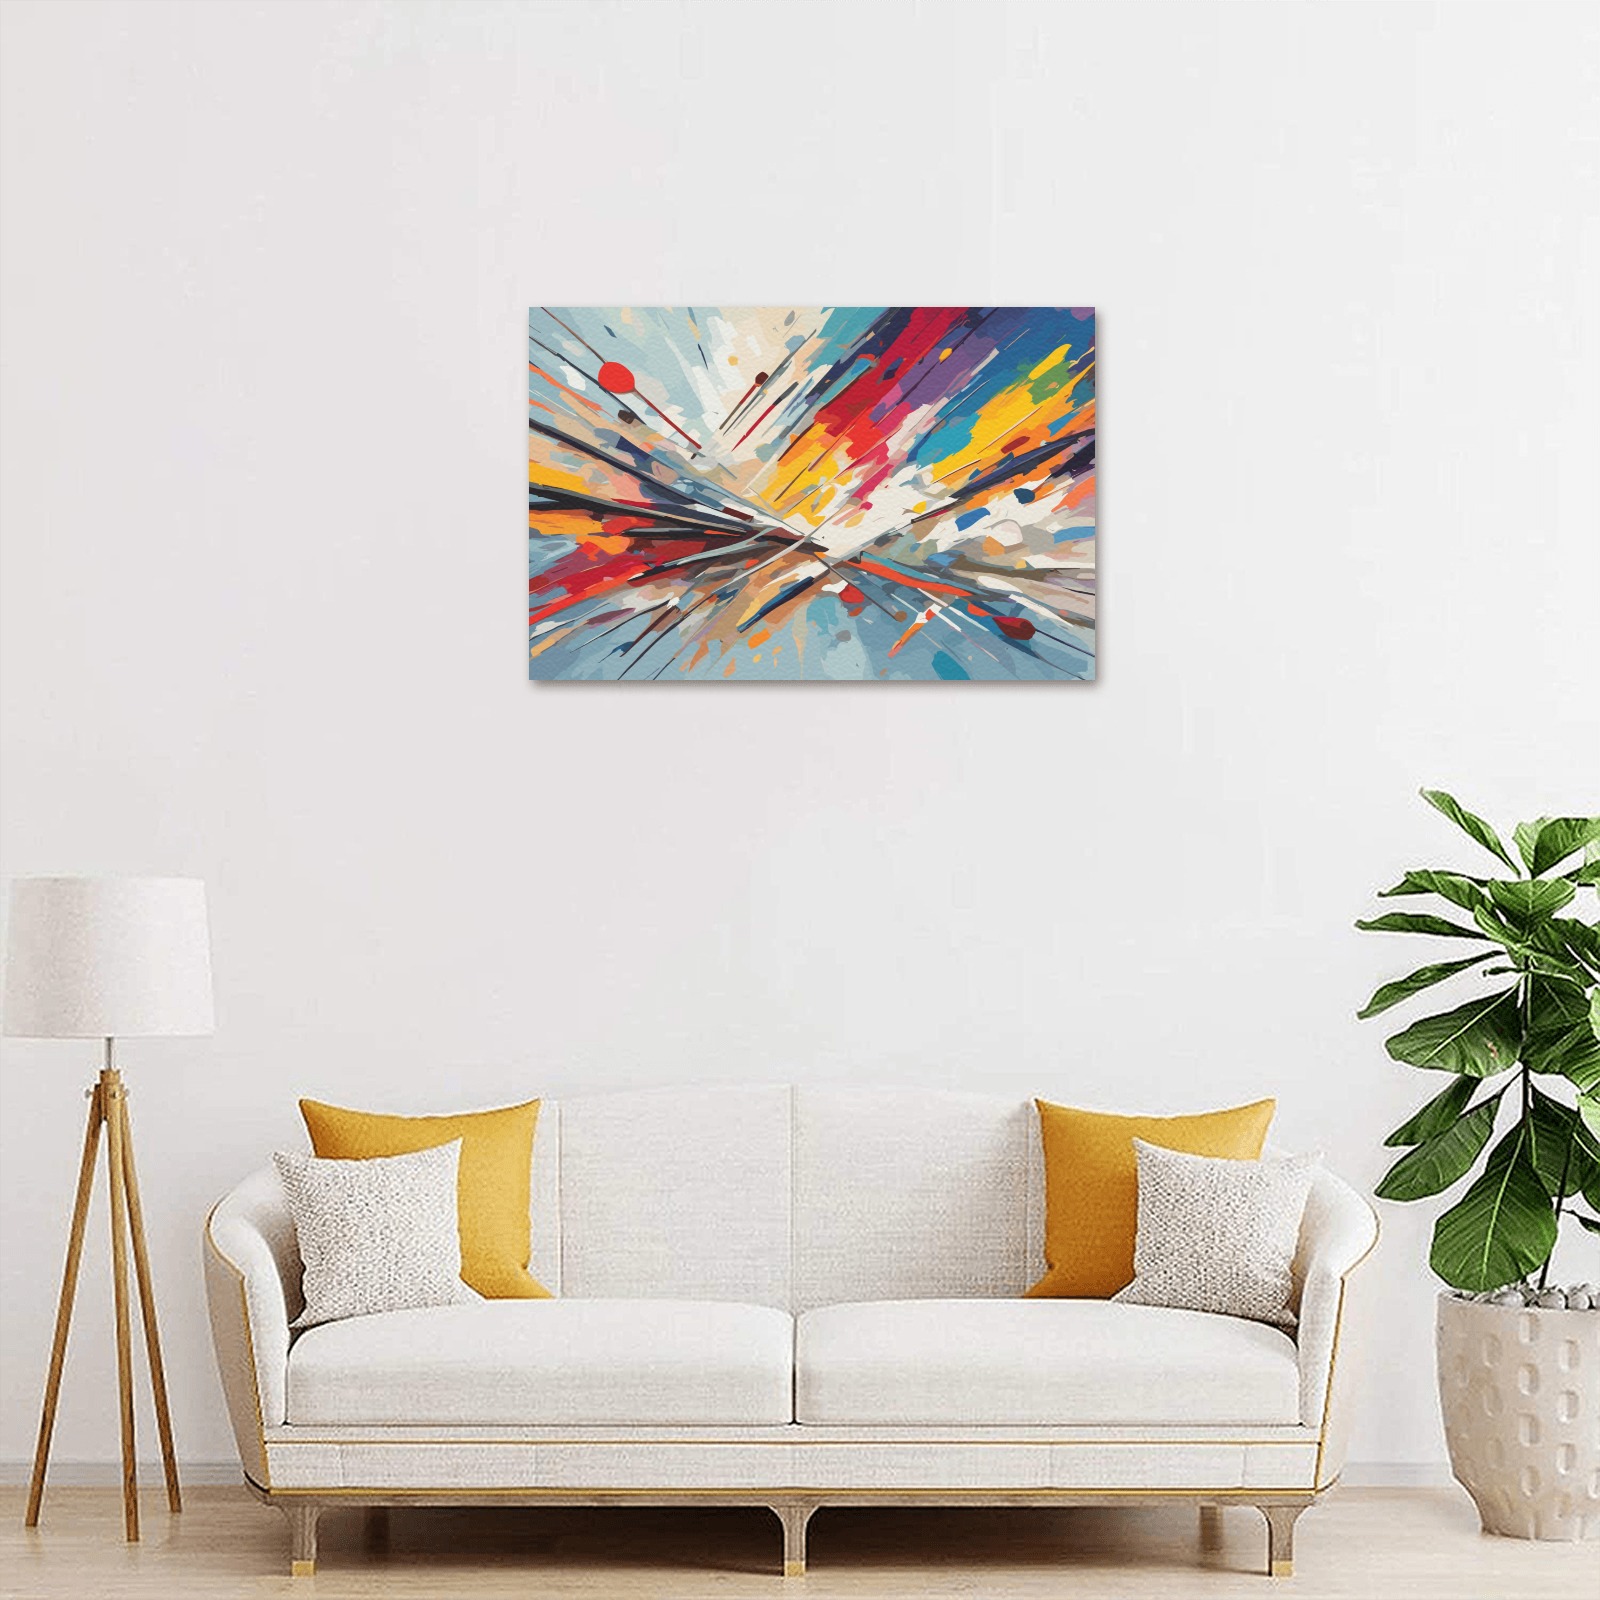 Artistic abstract art of colors on blue and beige Upgraded Canvas Print 18"x12"